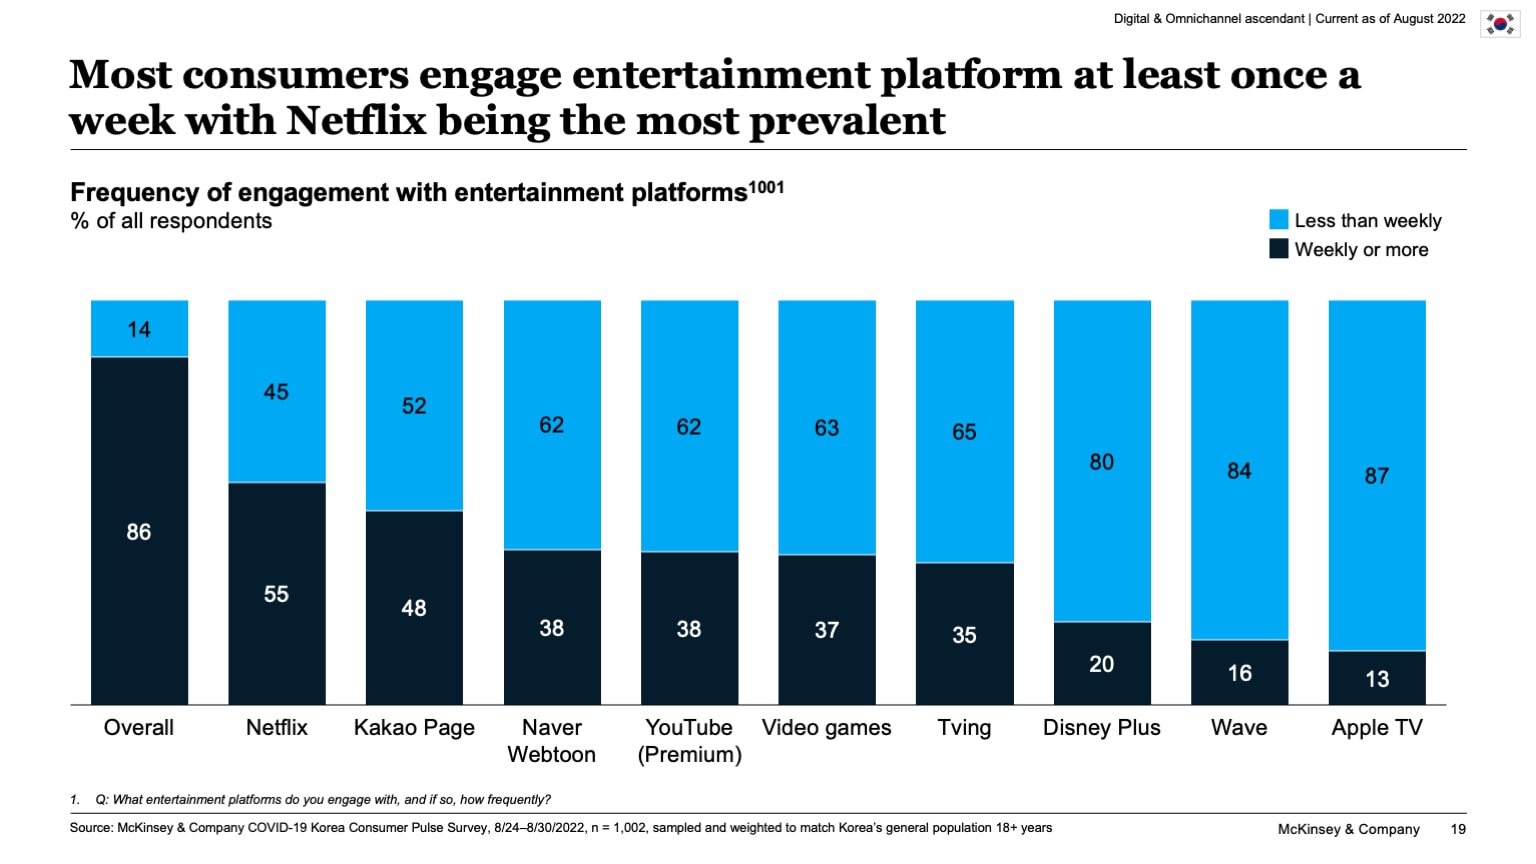 Most consumers engage entertainment platform at least once a week with Netflix being the most prevalent